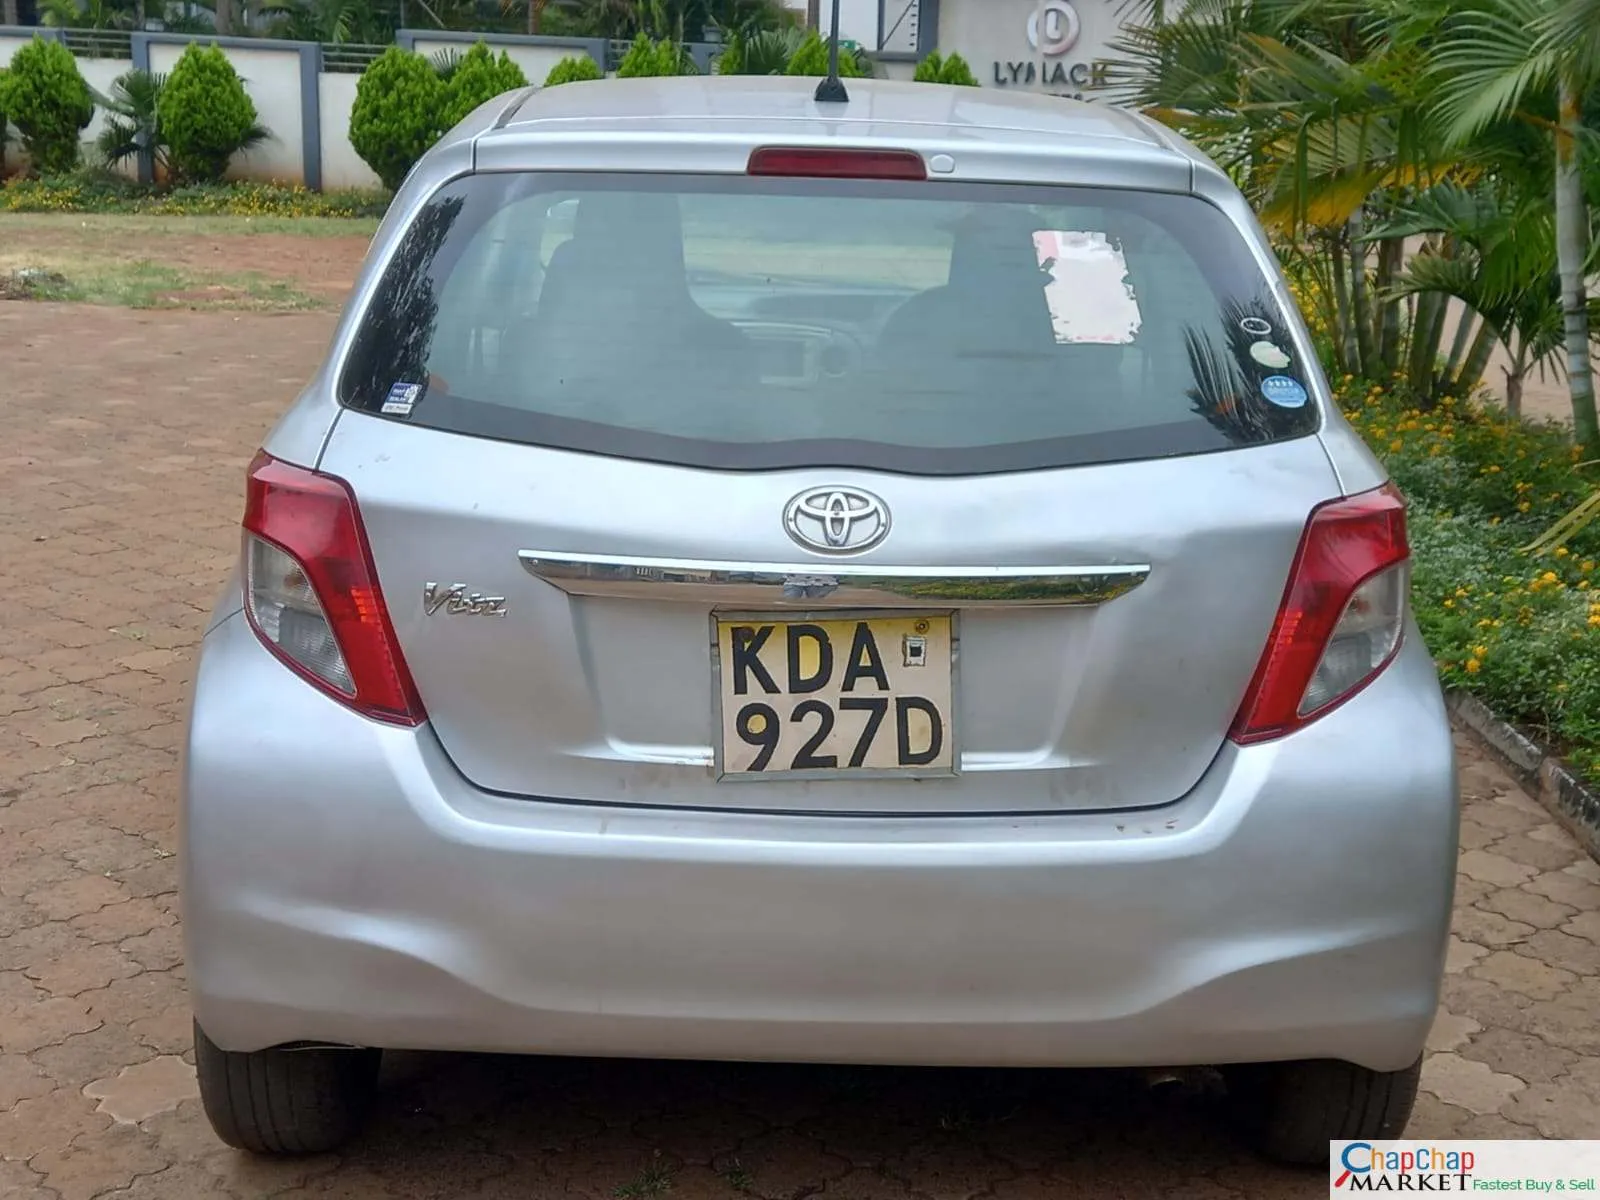 Toyota Vitz kenya QUICK SALE You Pay 30% Deposit Trade in OK EXCLUSIVE vitz for sale in kenya hire purchase installments EXCLUSIVE 🔥